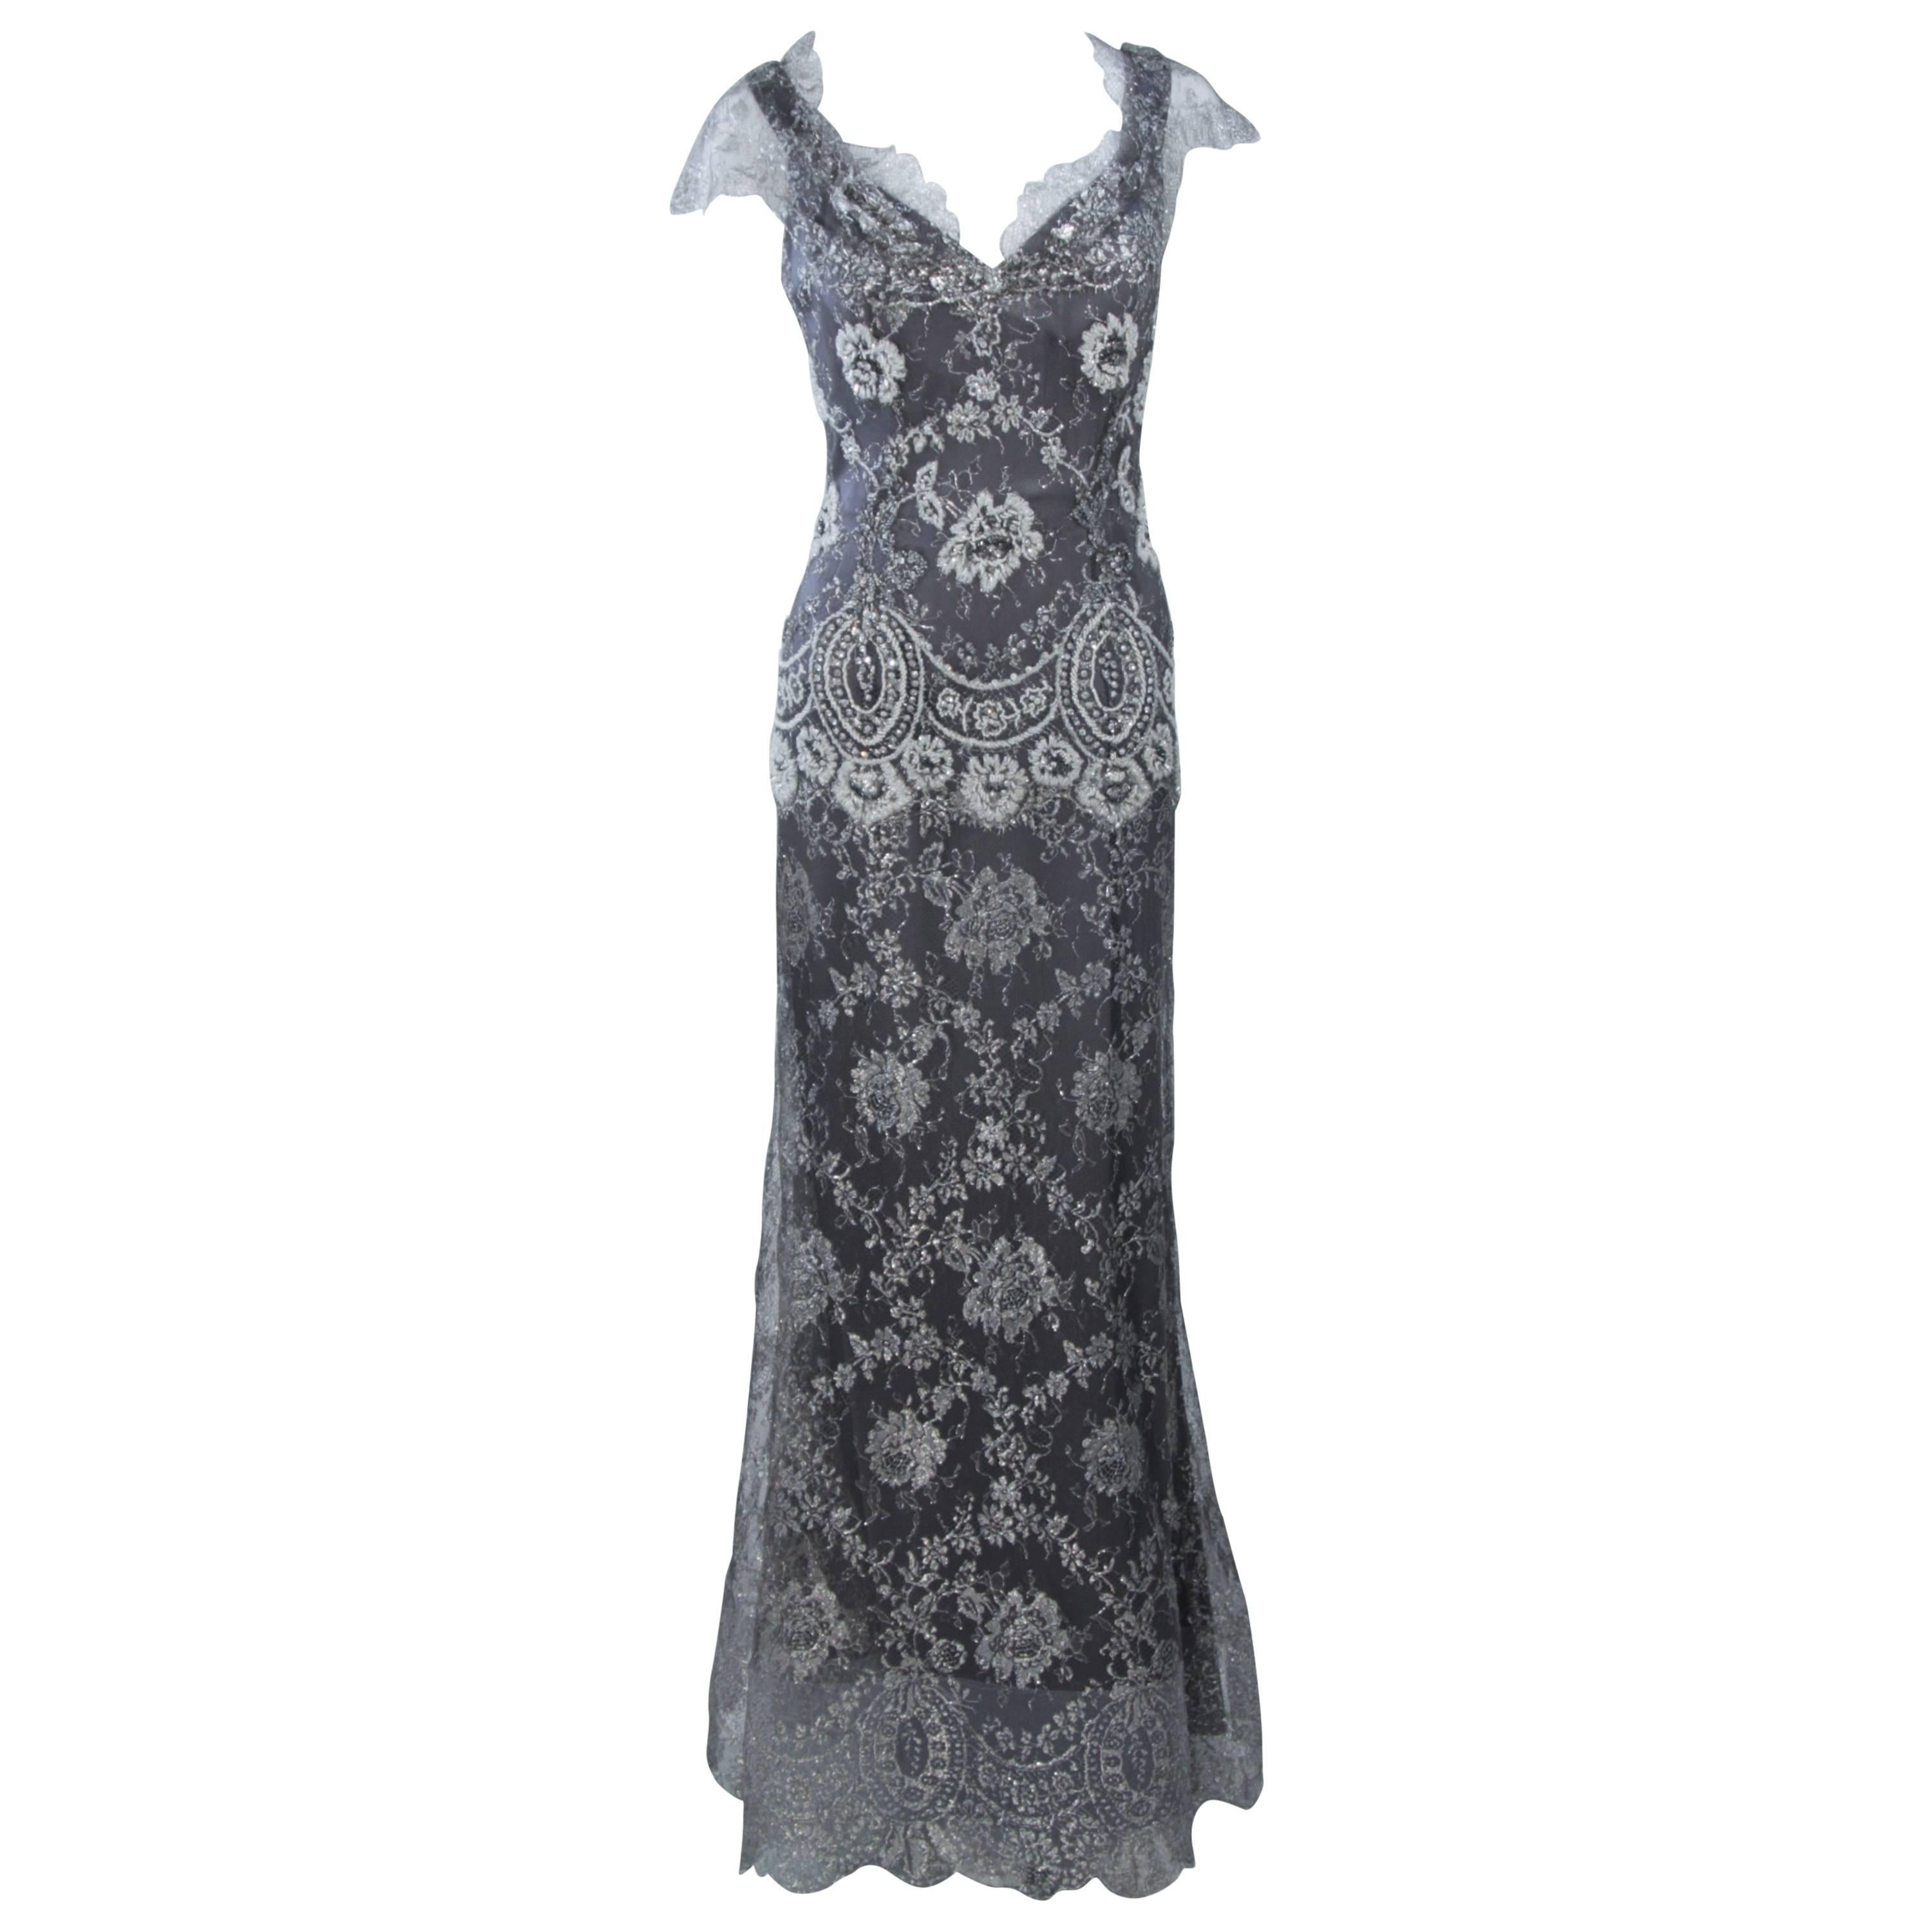 FE ZANDI Silver Lace Lame Gown with Scalloped Edges Size 8-10 For Sale